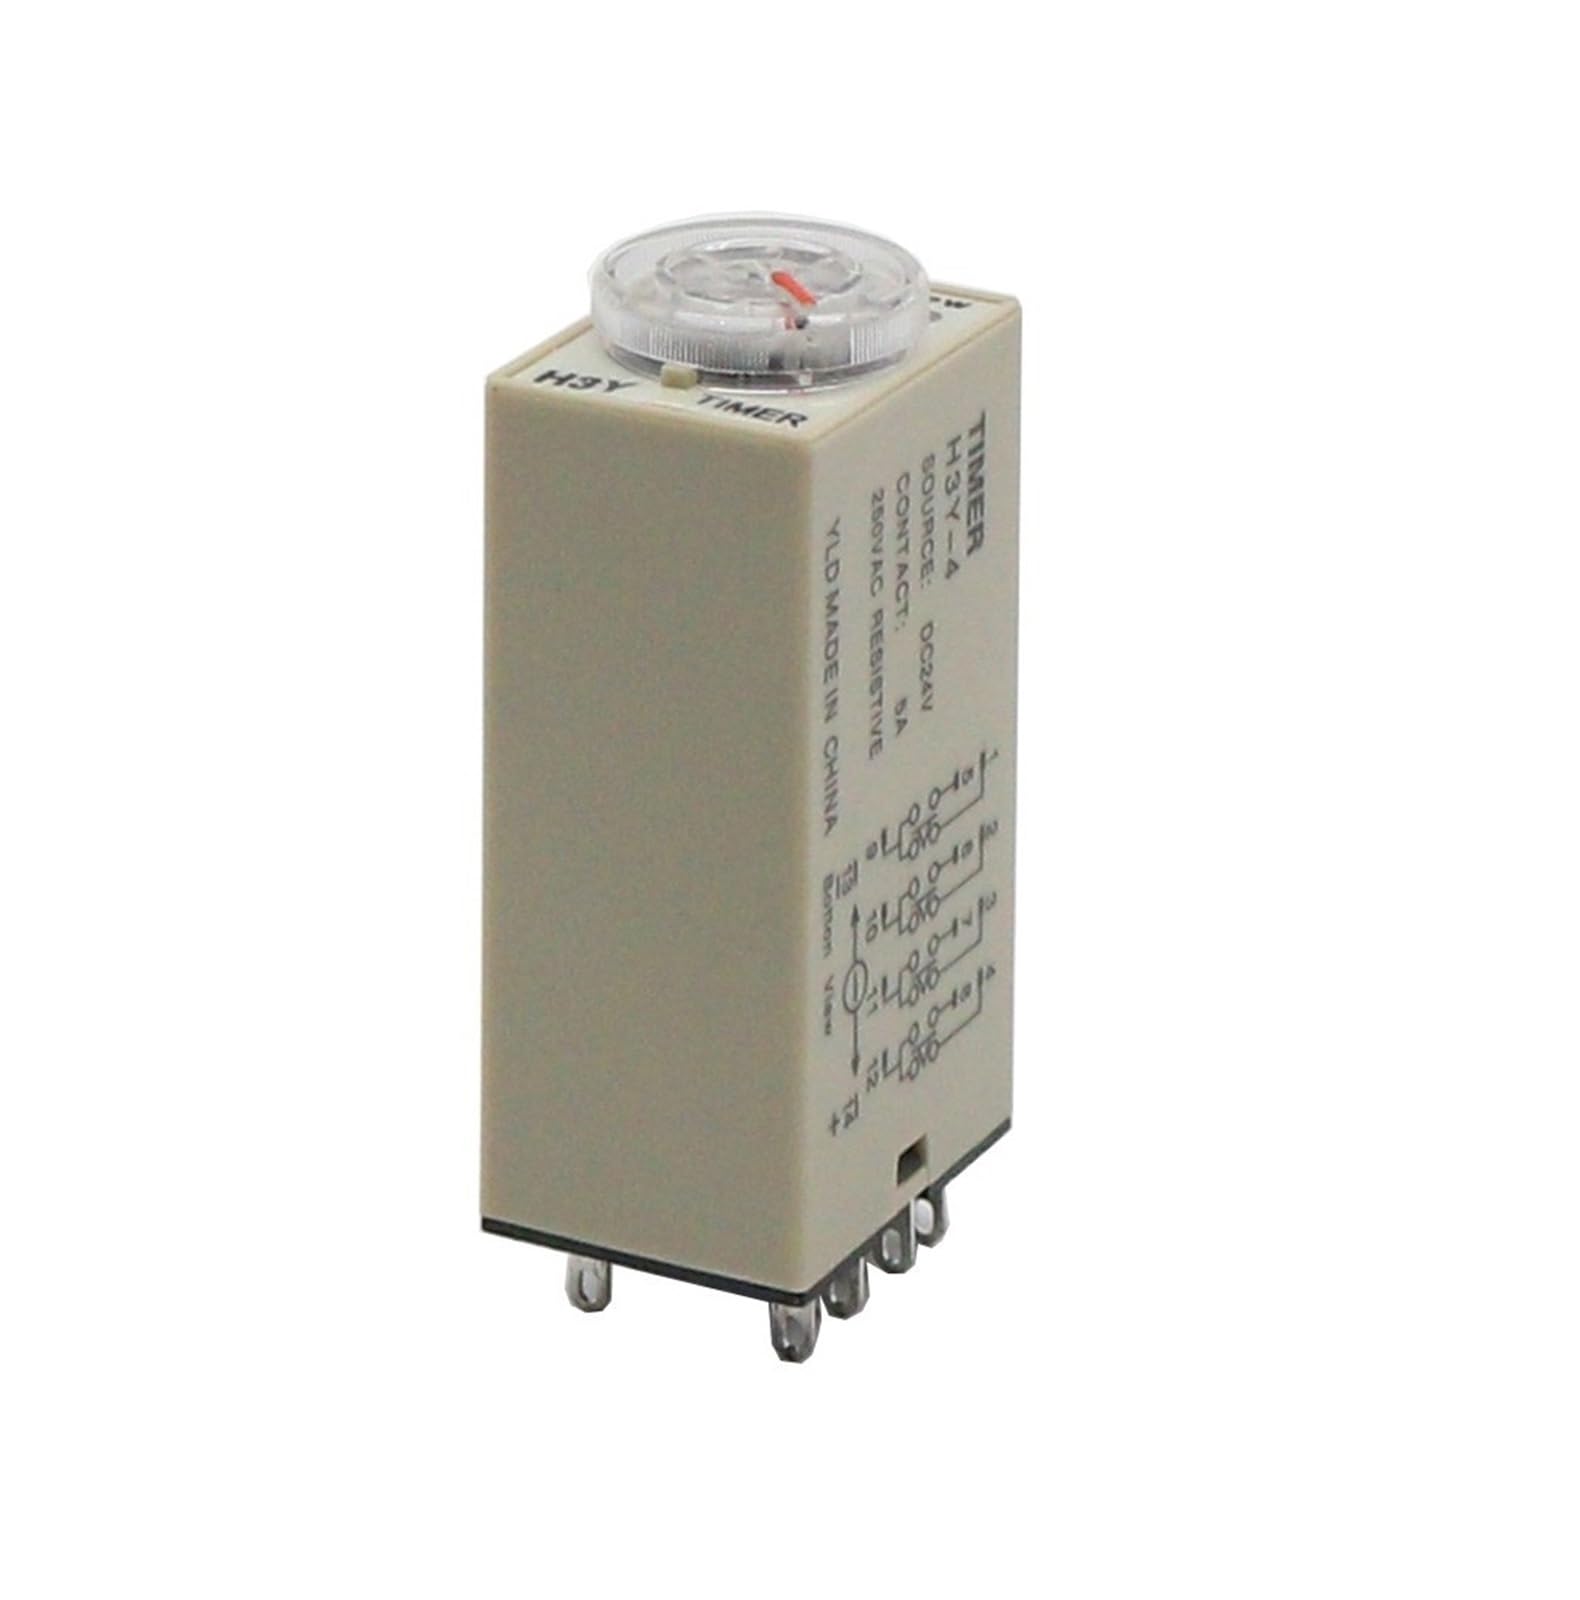 1pcs Power on Delay Time Relay H3Y-4 Small 14-pinDC12V24vAC220v Timer Switch 1S 3S 5S 30S 60S 5M 10M 30M 60M NWPNLXEA(AC 220V,H3Y-4 3Minute) von NWPNLXEA